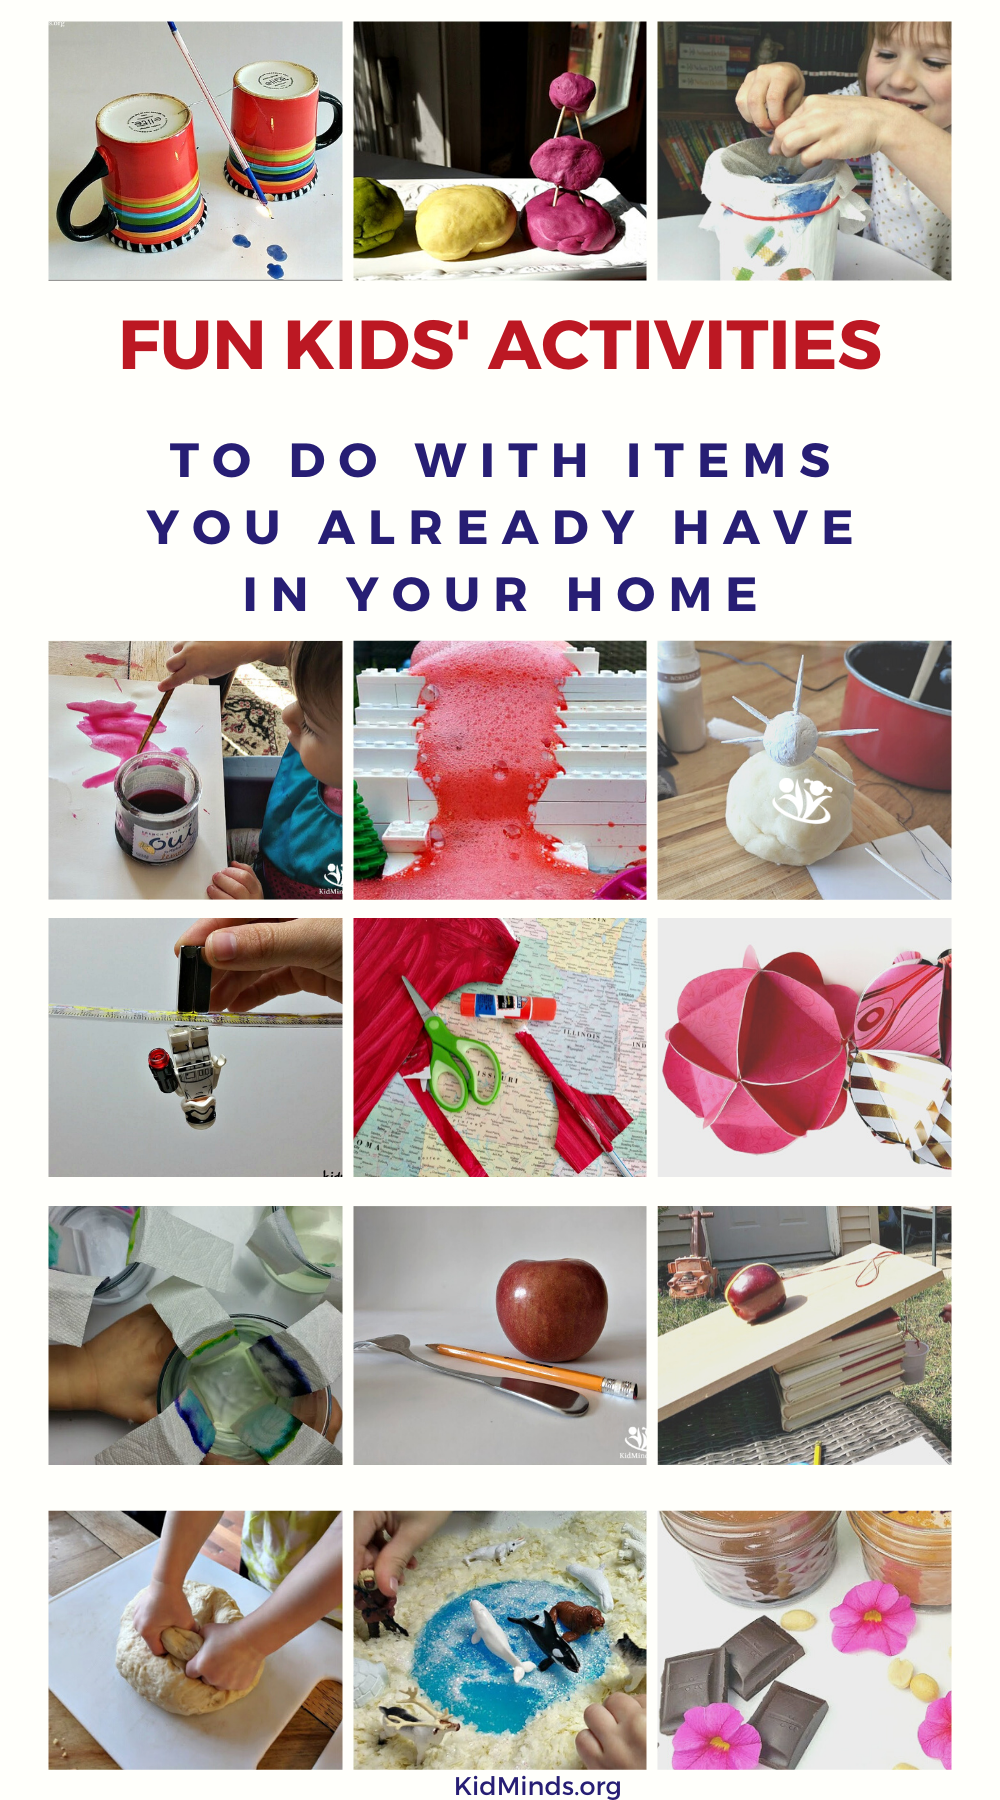 You won’t believe how many amazingly fun and educational kids’ activities you can set up using common household items! #funathomewithkids #earlylearning #handsonlearning #formoms #kitchenscience #STEAM #boredombusters